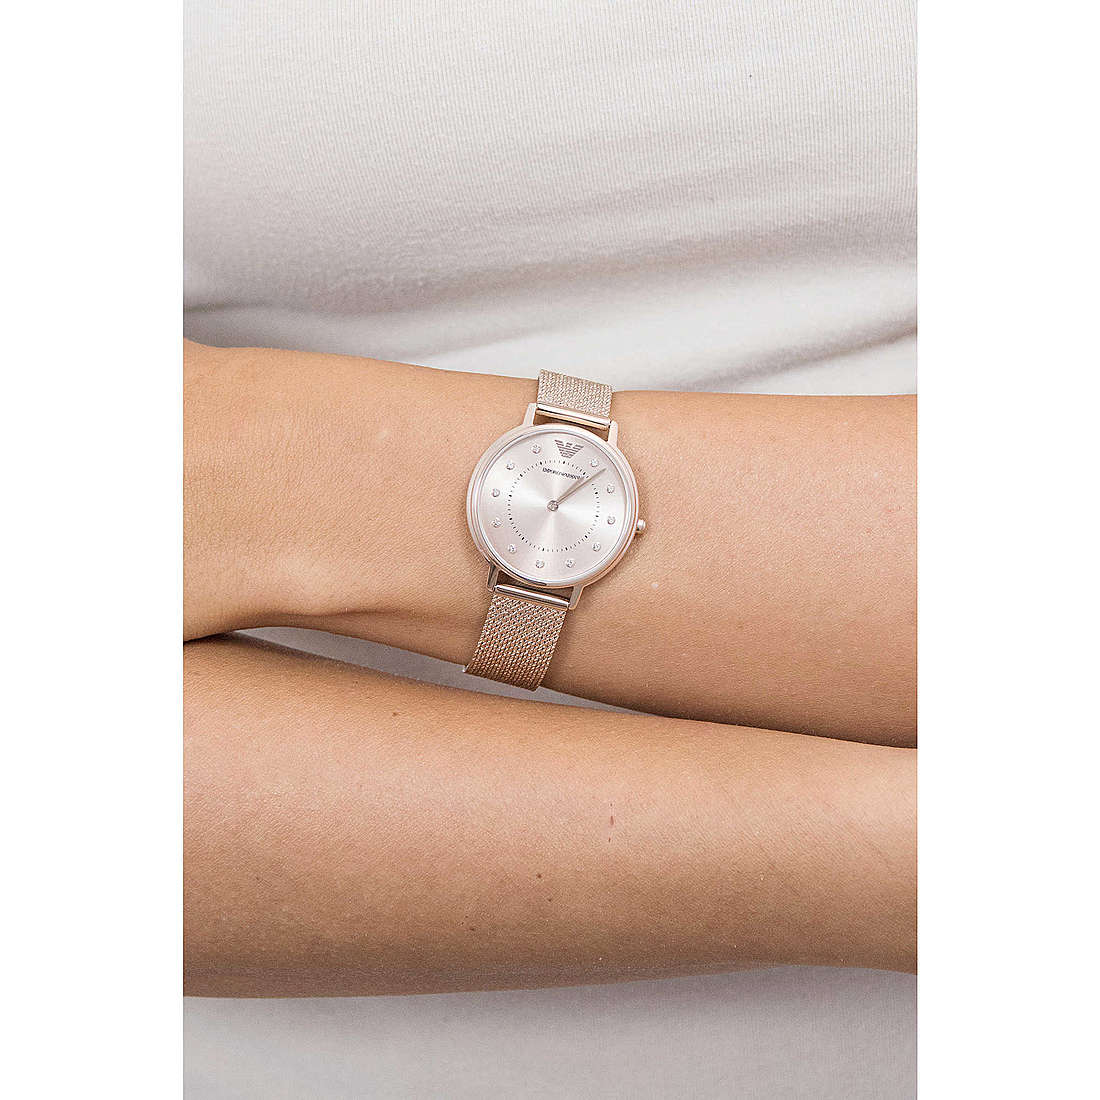 Emporio Armani only time woman AR11129 wearing